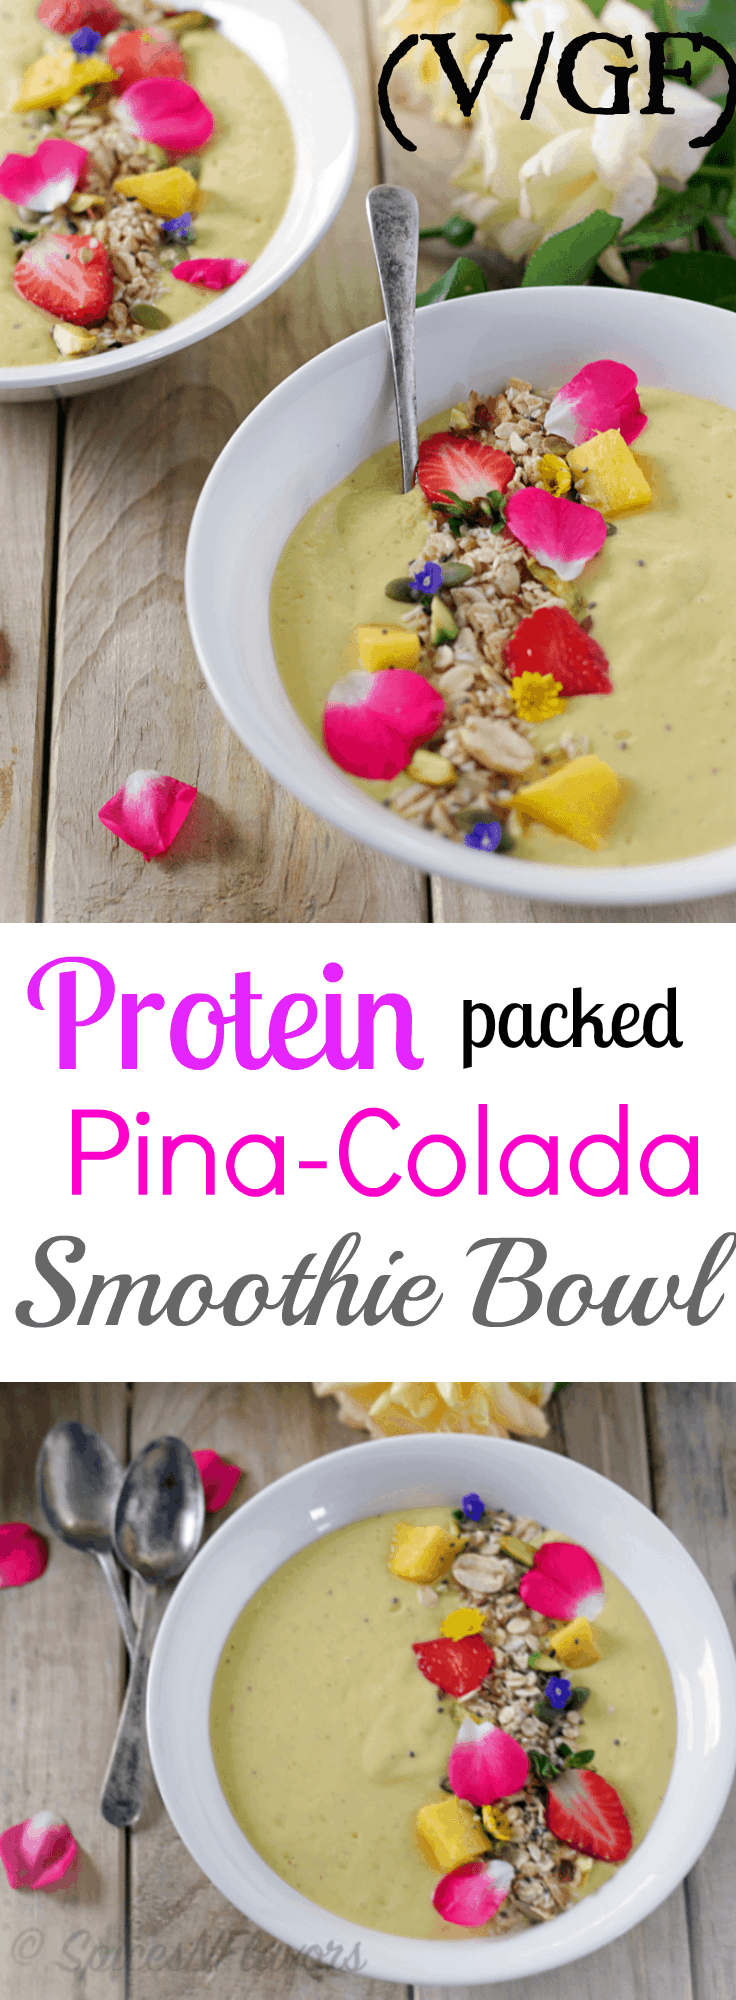 protein-enriched-pina-colada-smoothie-bowl healthy vegan gluten free bowl perfect for breakfast